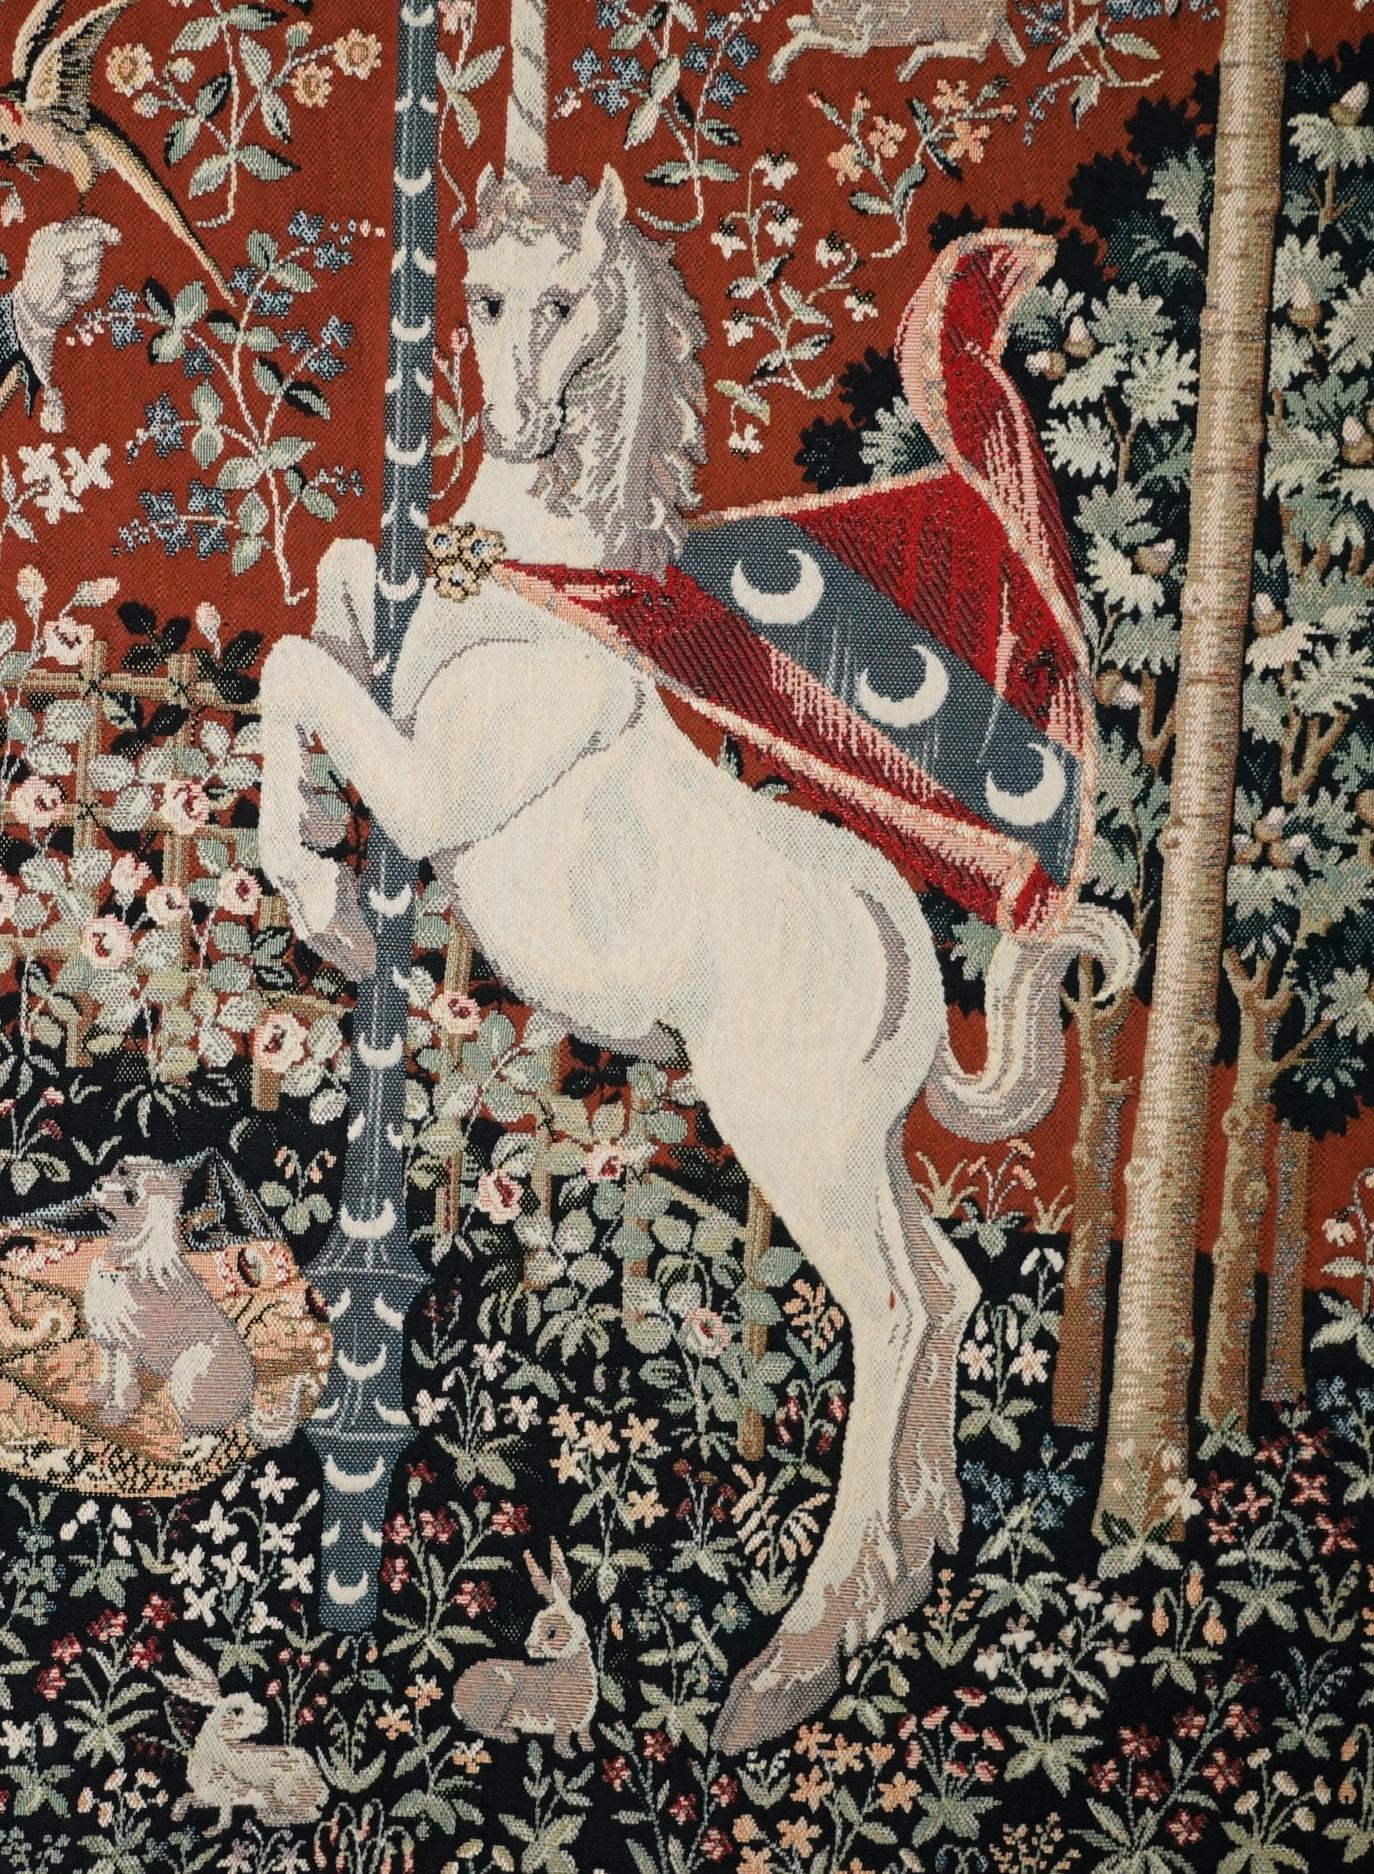 ViNTAGE THE LADY AND THE UNICORN LARGE WALL HANGING WOVEN TAPEStry 216CM X 189CM (Stoff)